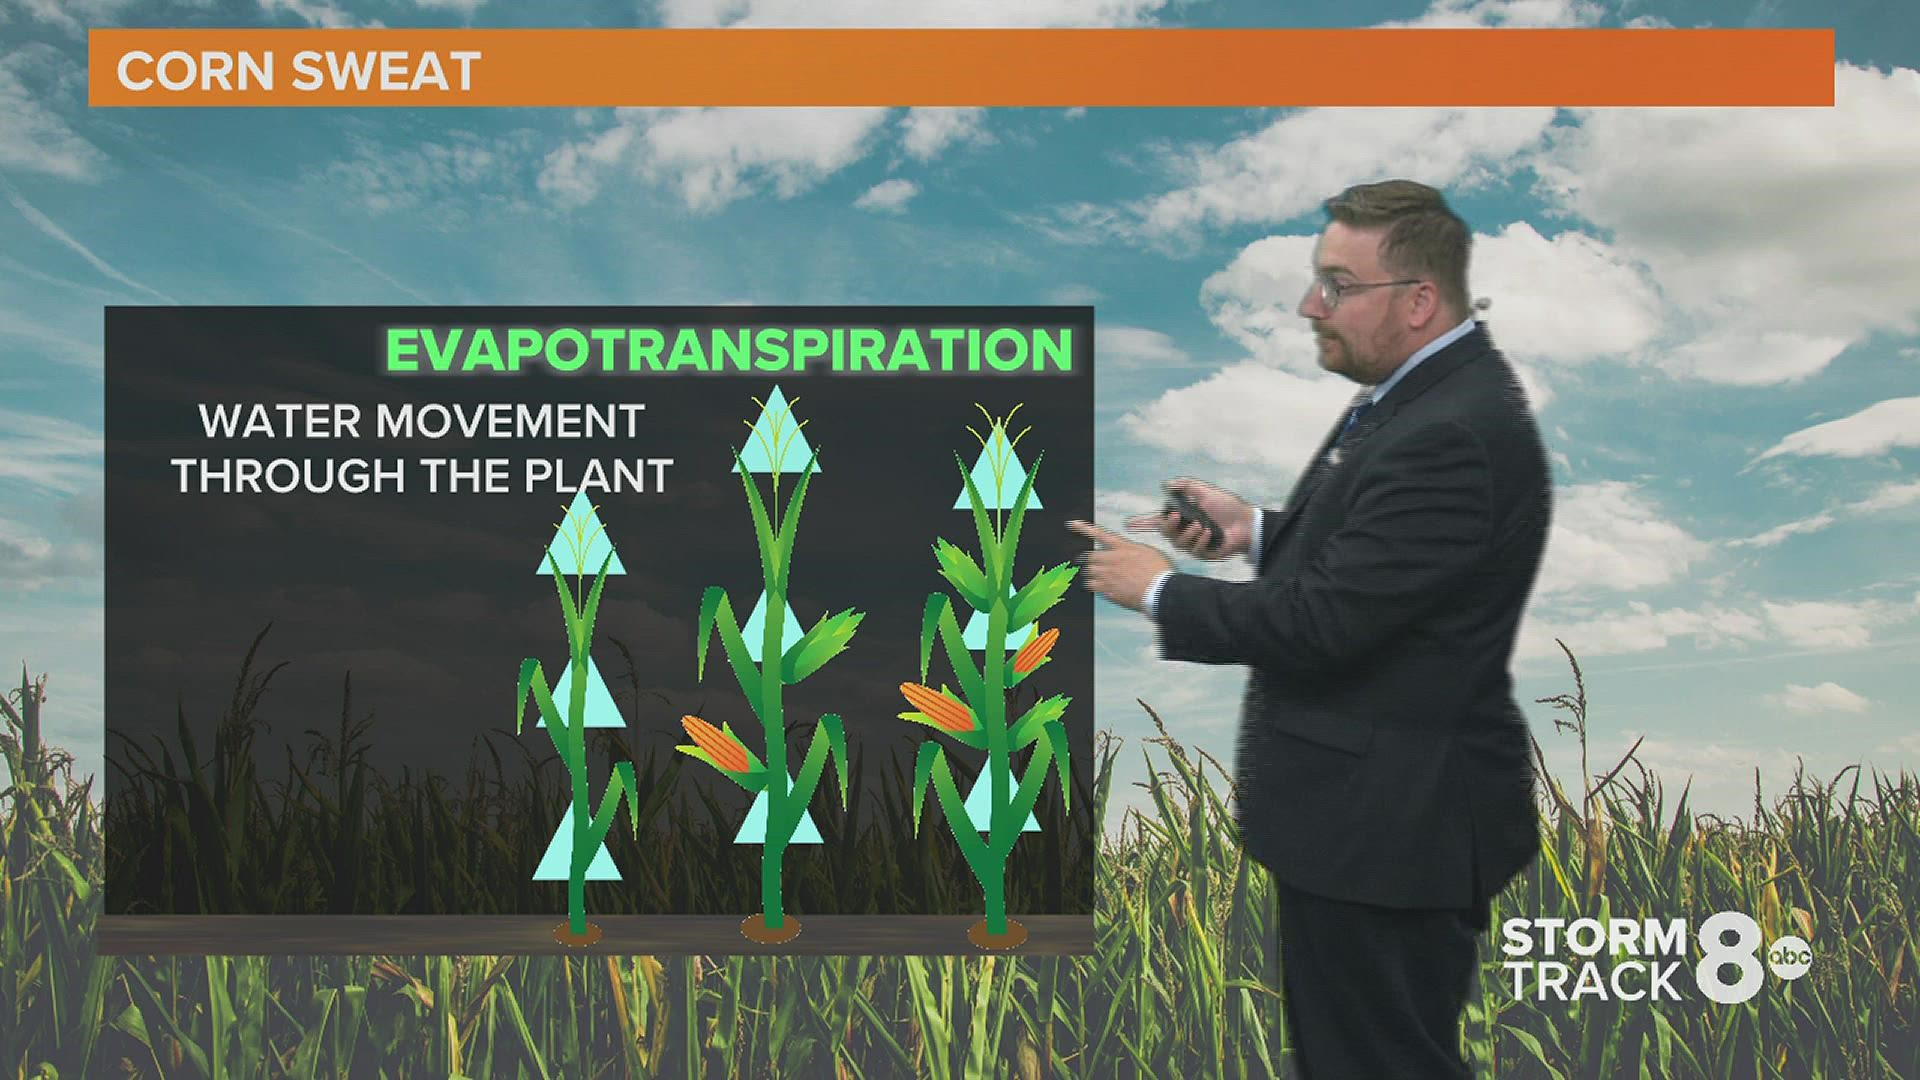 Corn and soybean crops can make the humidity feel even worse during the summer months. Here's why.